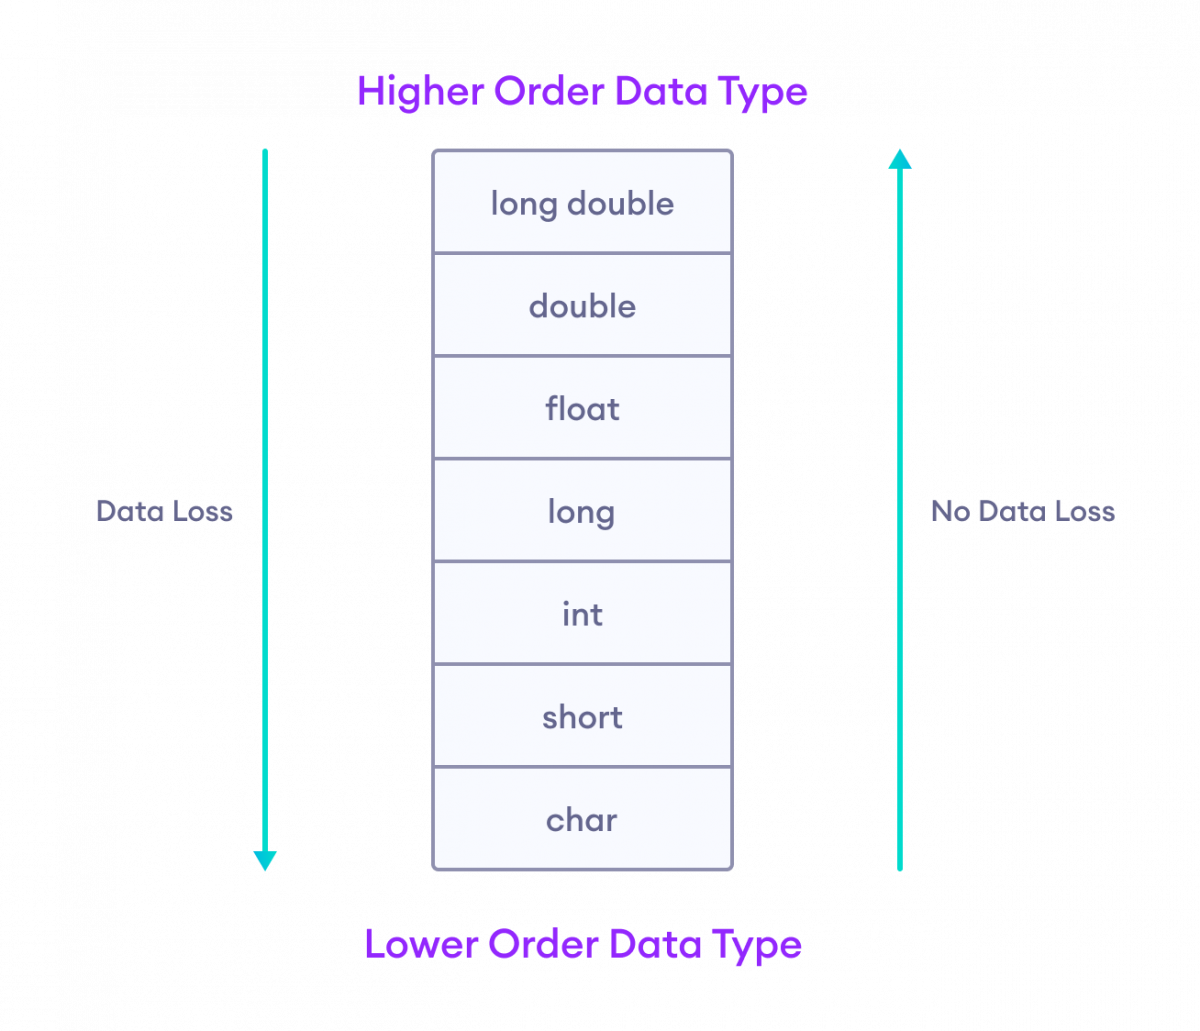 Data is lost when converting from a higher data type to a lower data type